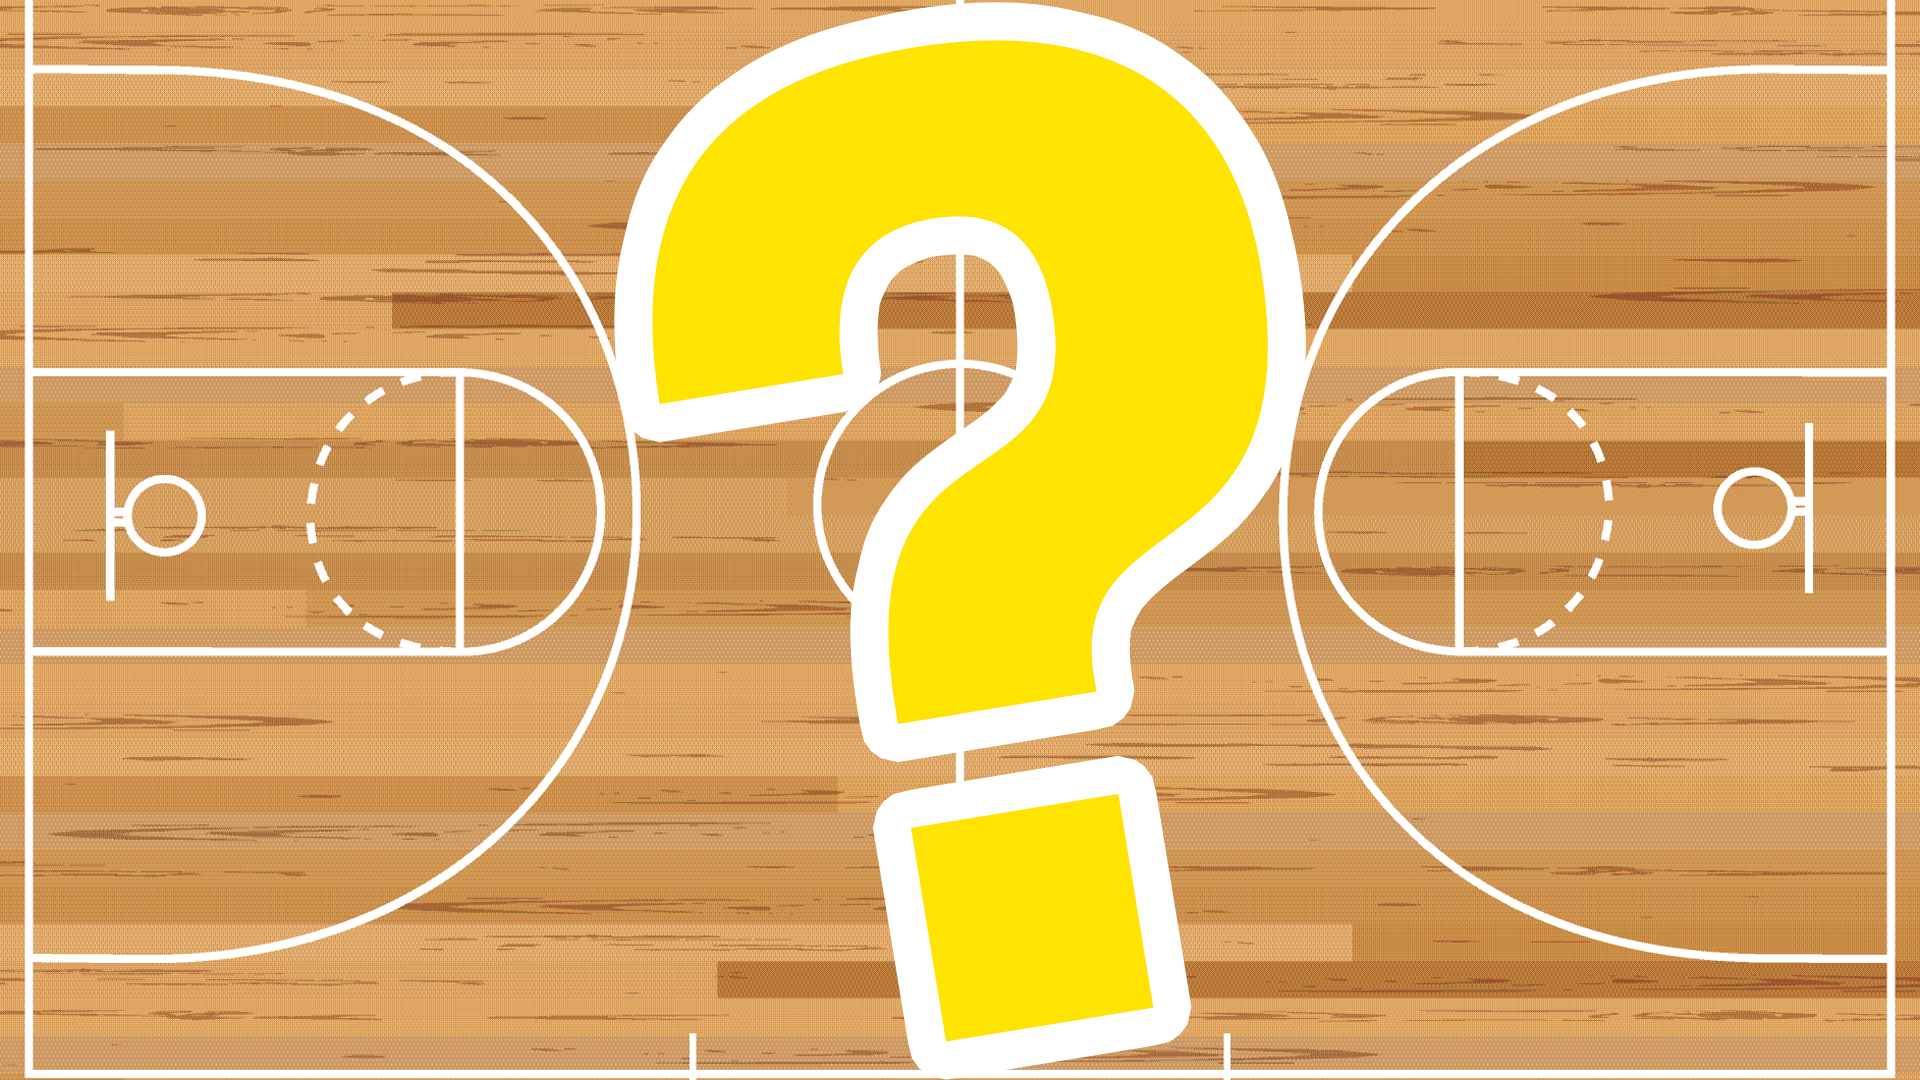 Basketball court background and question mark